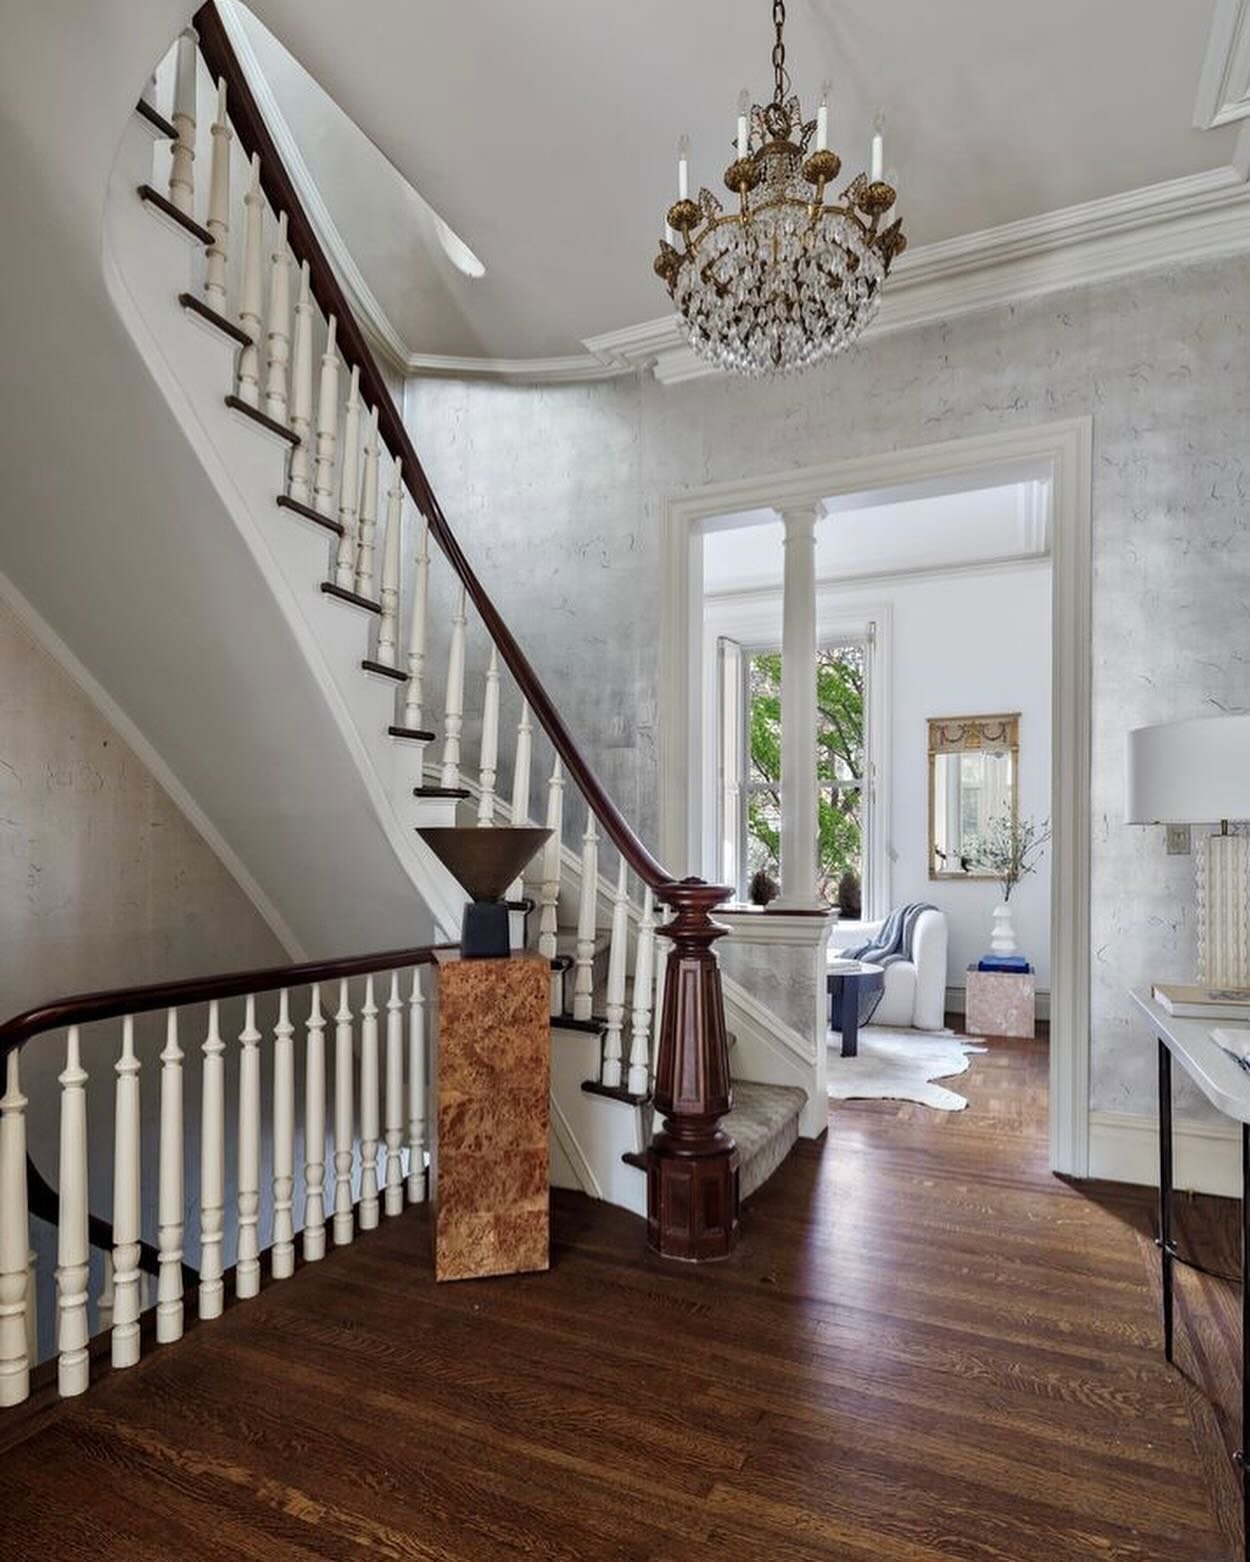 New to Market ✨ Welcome to 248 West 11th, a grand single family townhouse with incredible original details.

5 bedrooms and 4.5 bathrooms 
Asking: $8,995,000

For more details, please get in touch directly.

 @hudsonadvisory @claytonorrigo @stephenfe